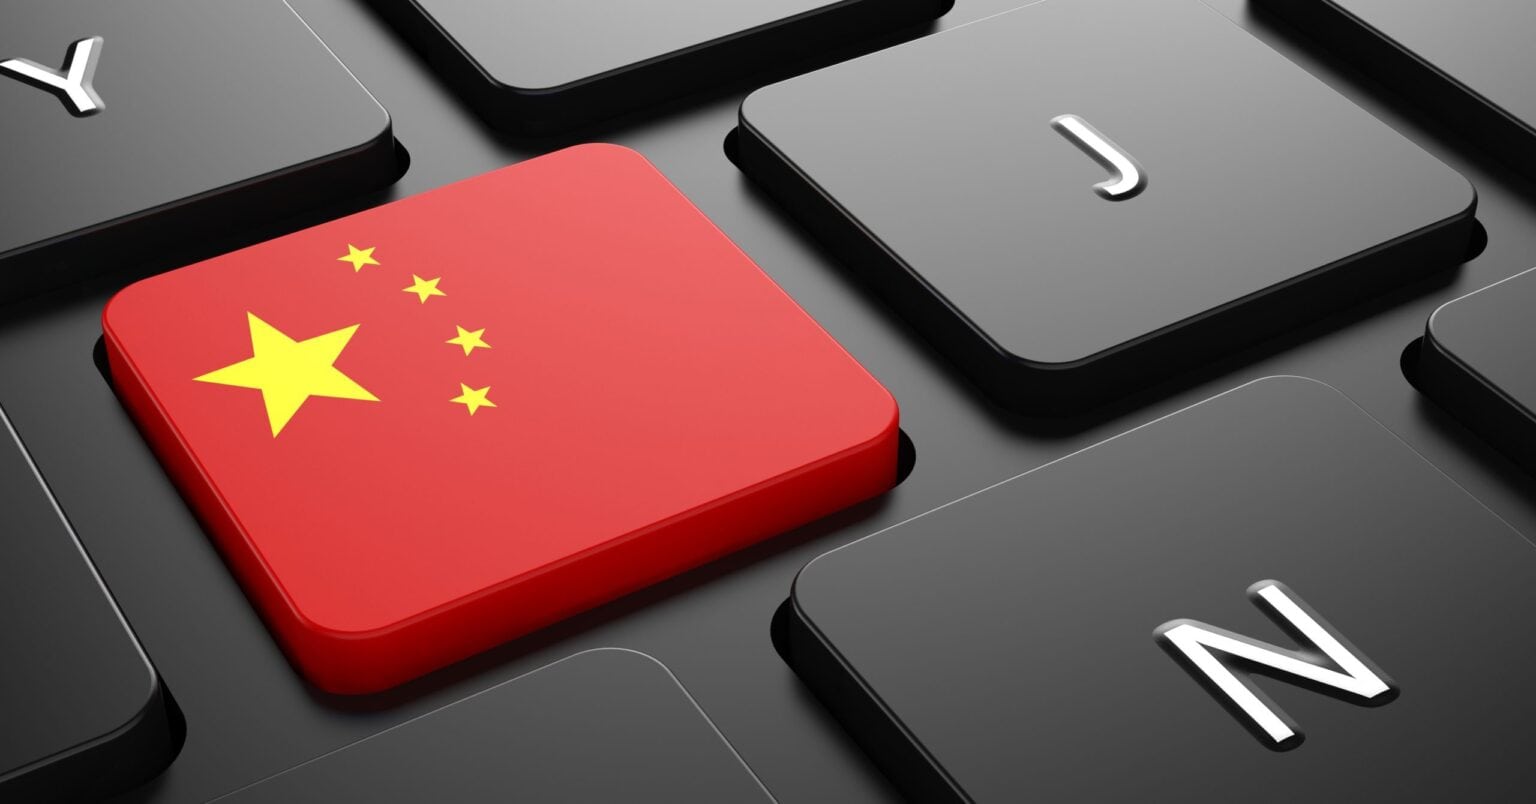 Websites and Apps Blocked in China